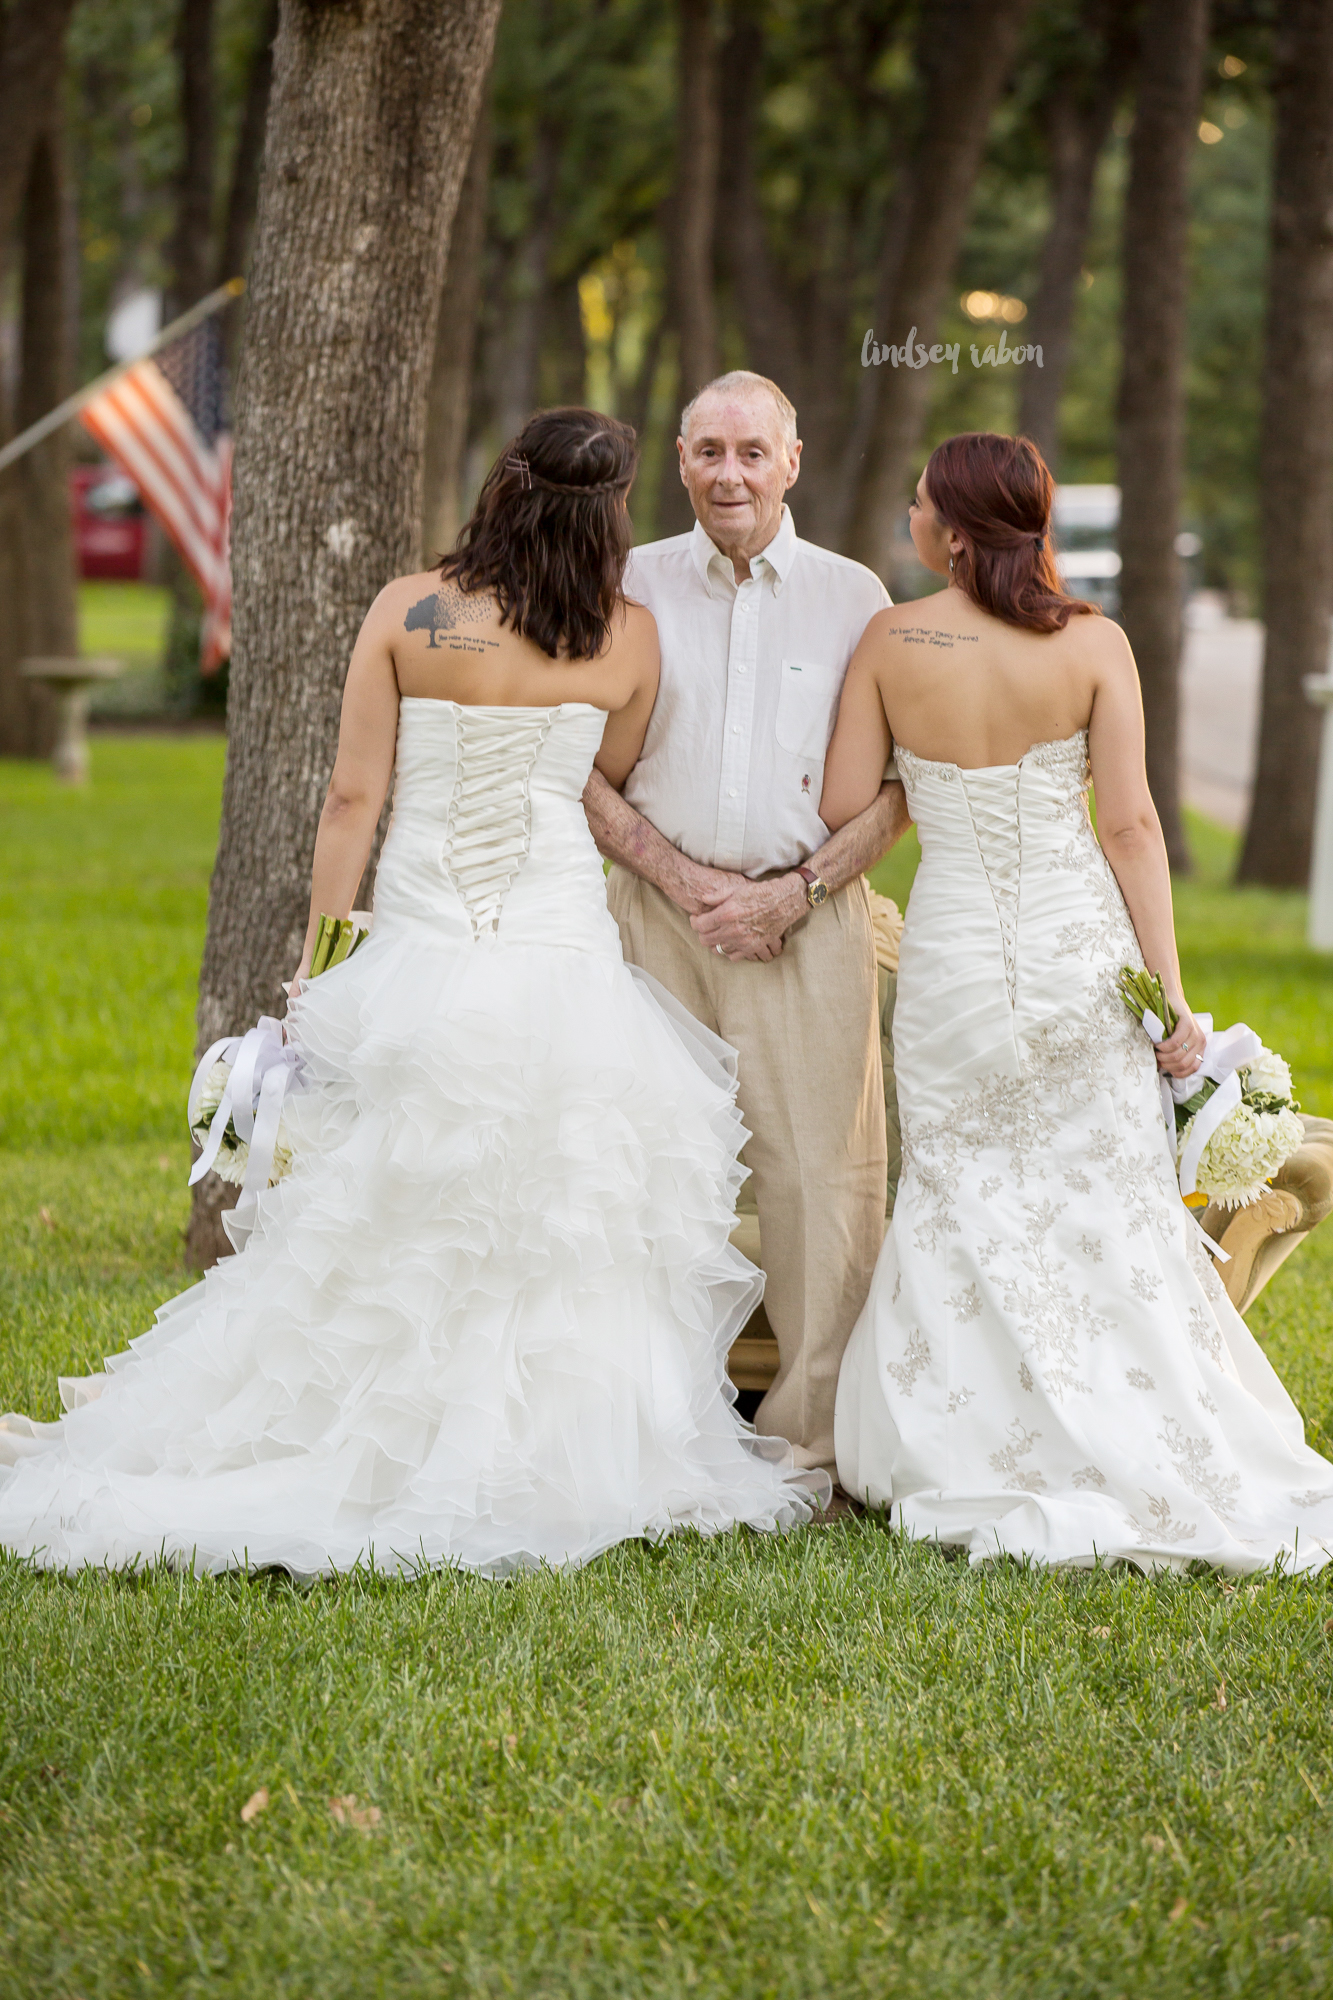 PHOTO: Twin sisters Sarah and Becca Duncan took wedding photos with their ailing dad Scott long before they're set to walk down the aisle.